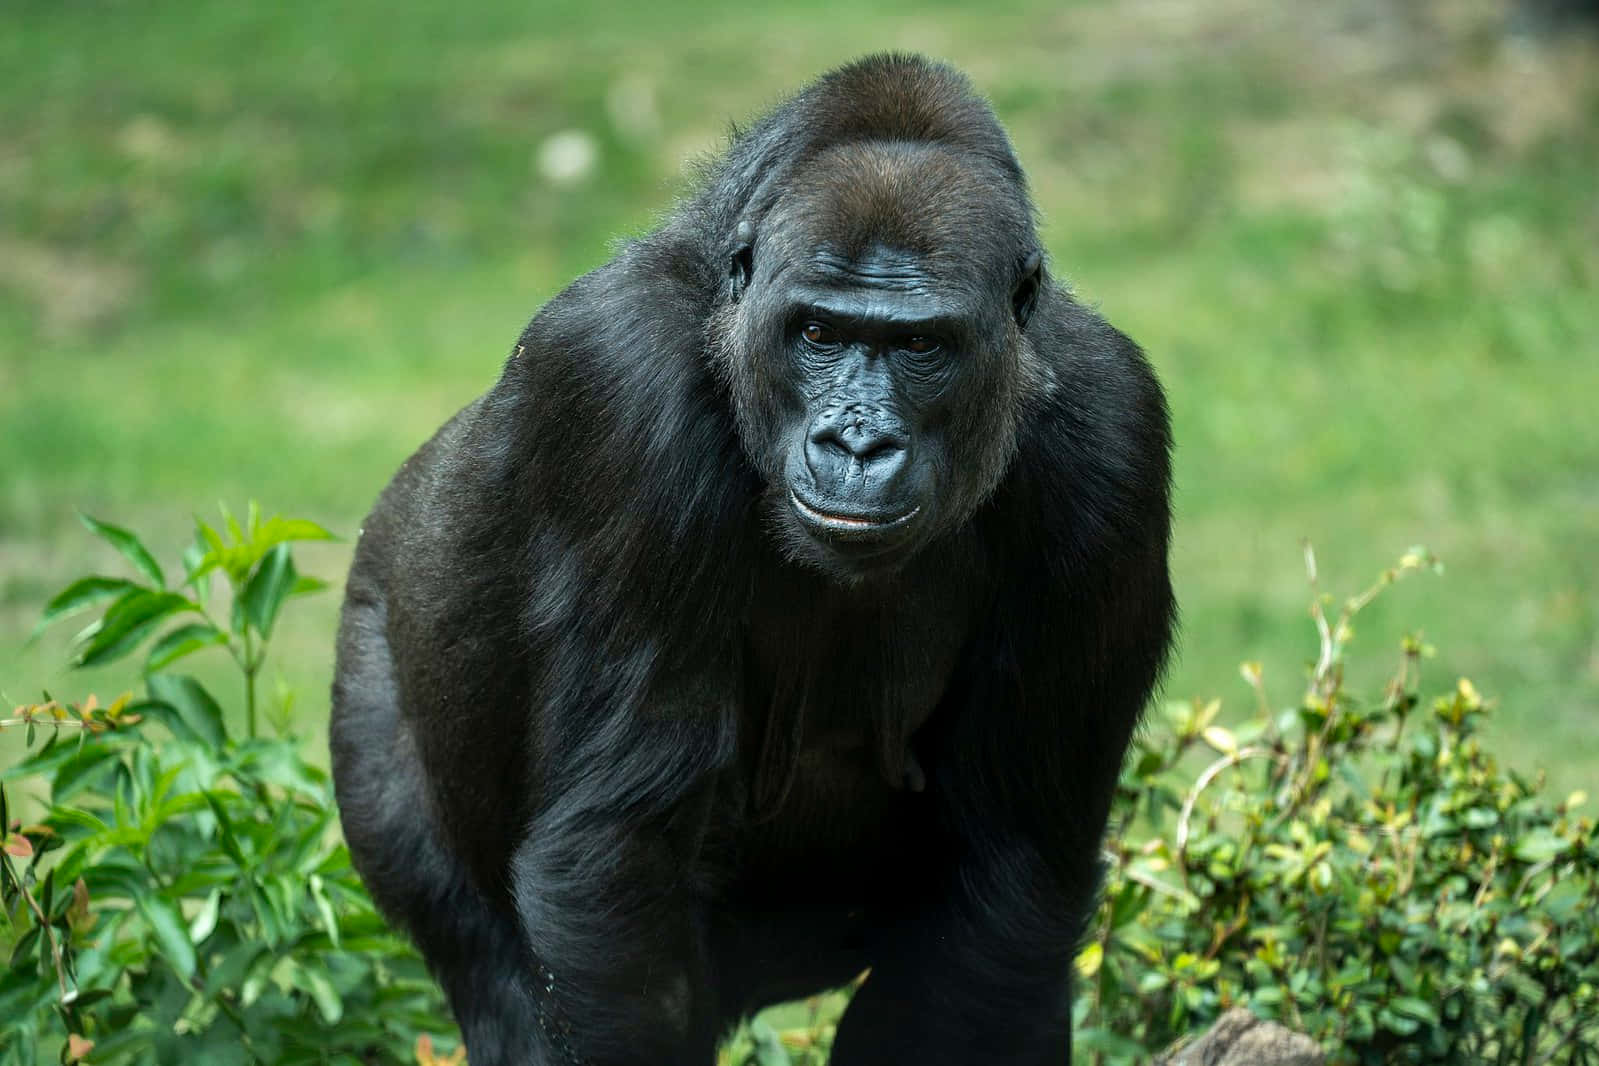 A Gentle Giant - A Close-up of a Male Gorilla